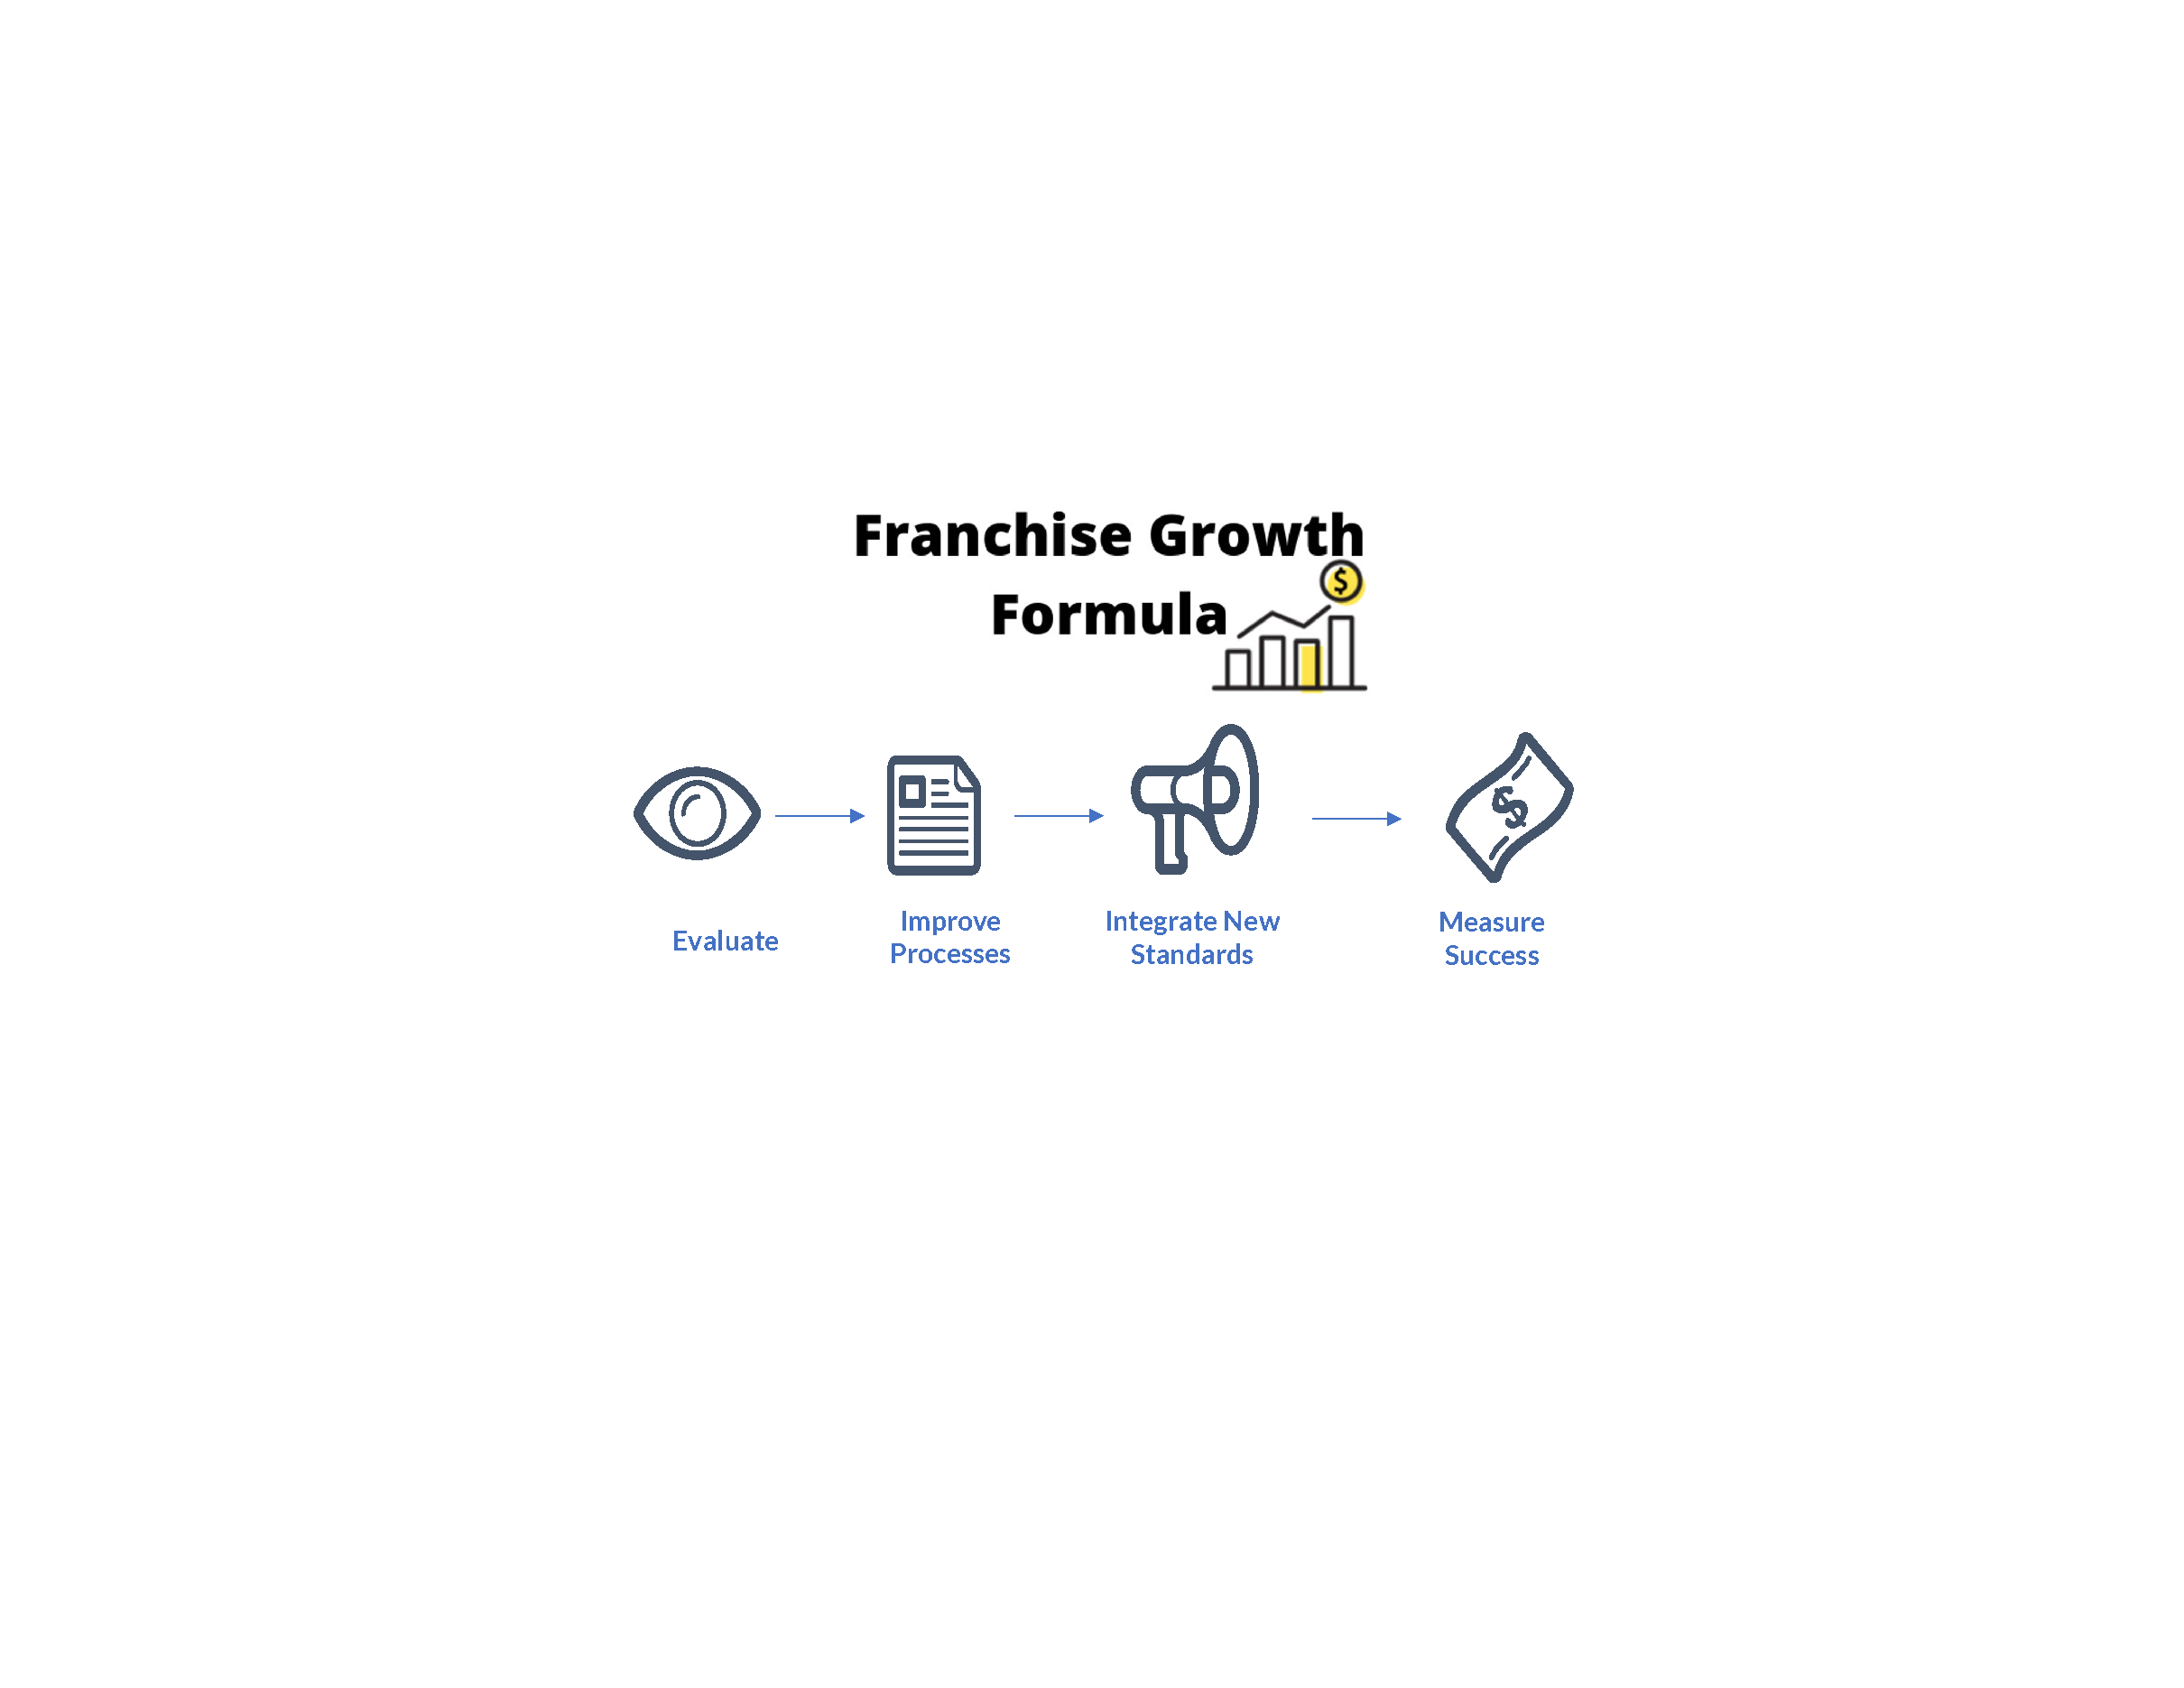 How to franchise your small business